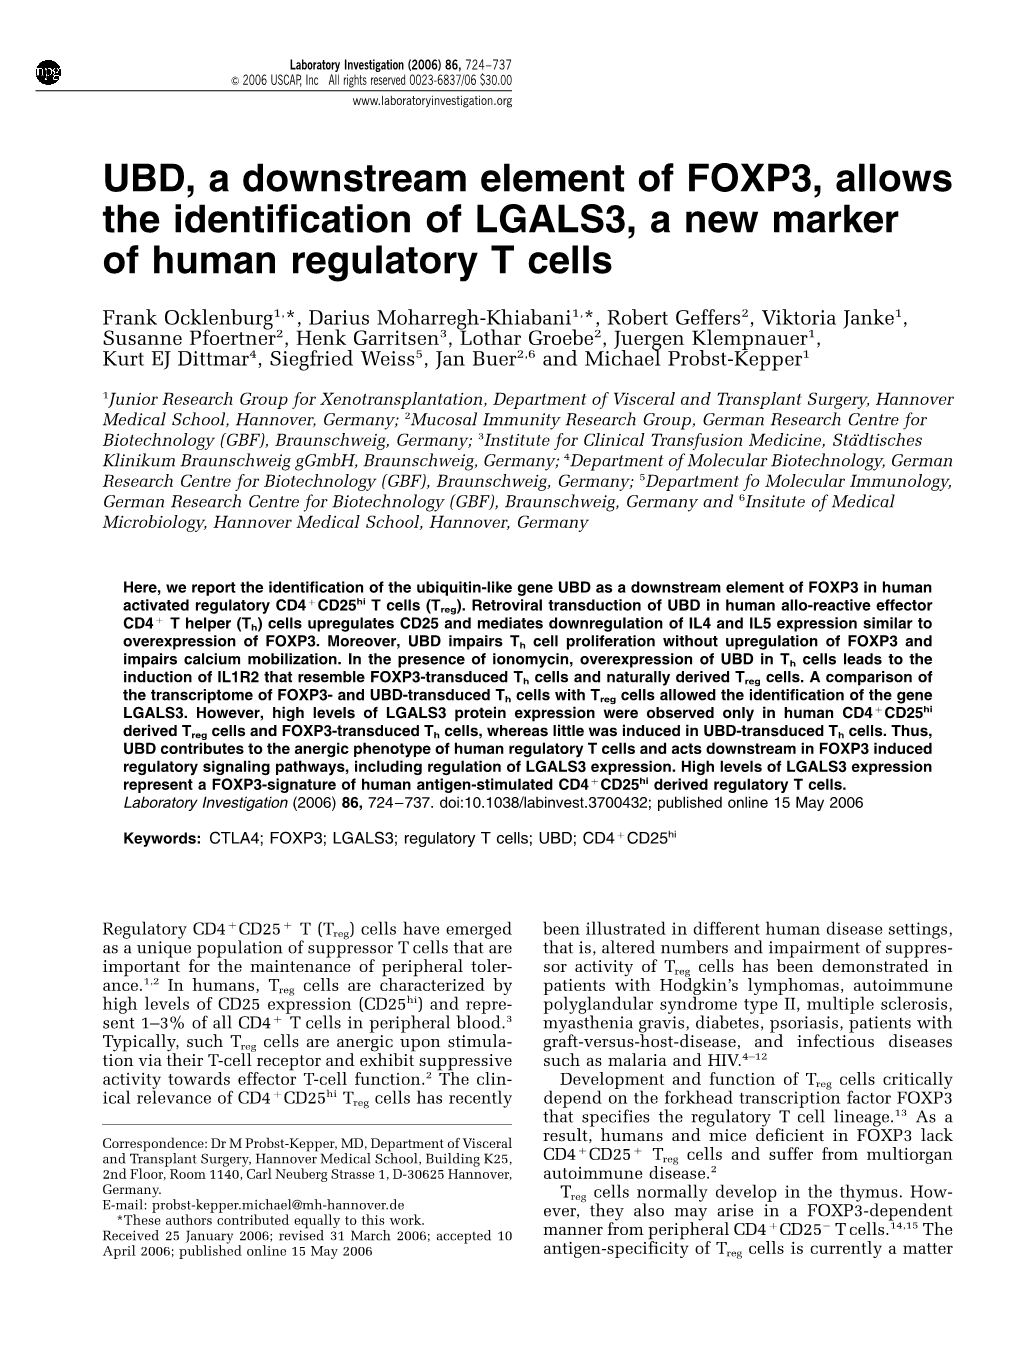 UBD, a Downstream Element of FOXP3, Allows the Identification of LGALS3, a New Marker of Human Regulatory T Cells